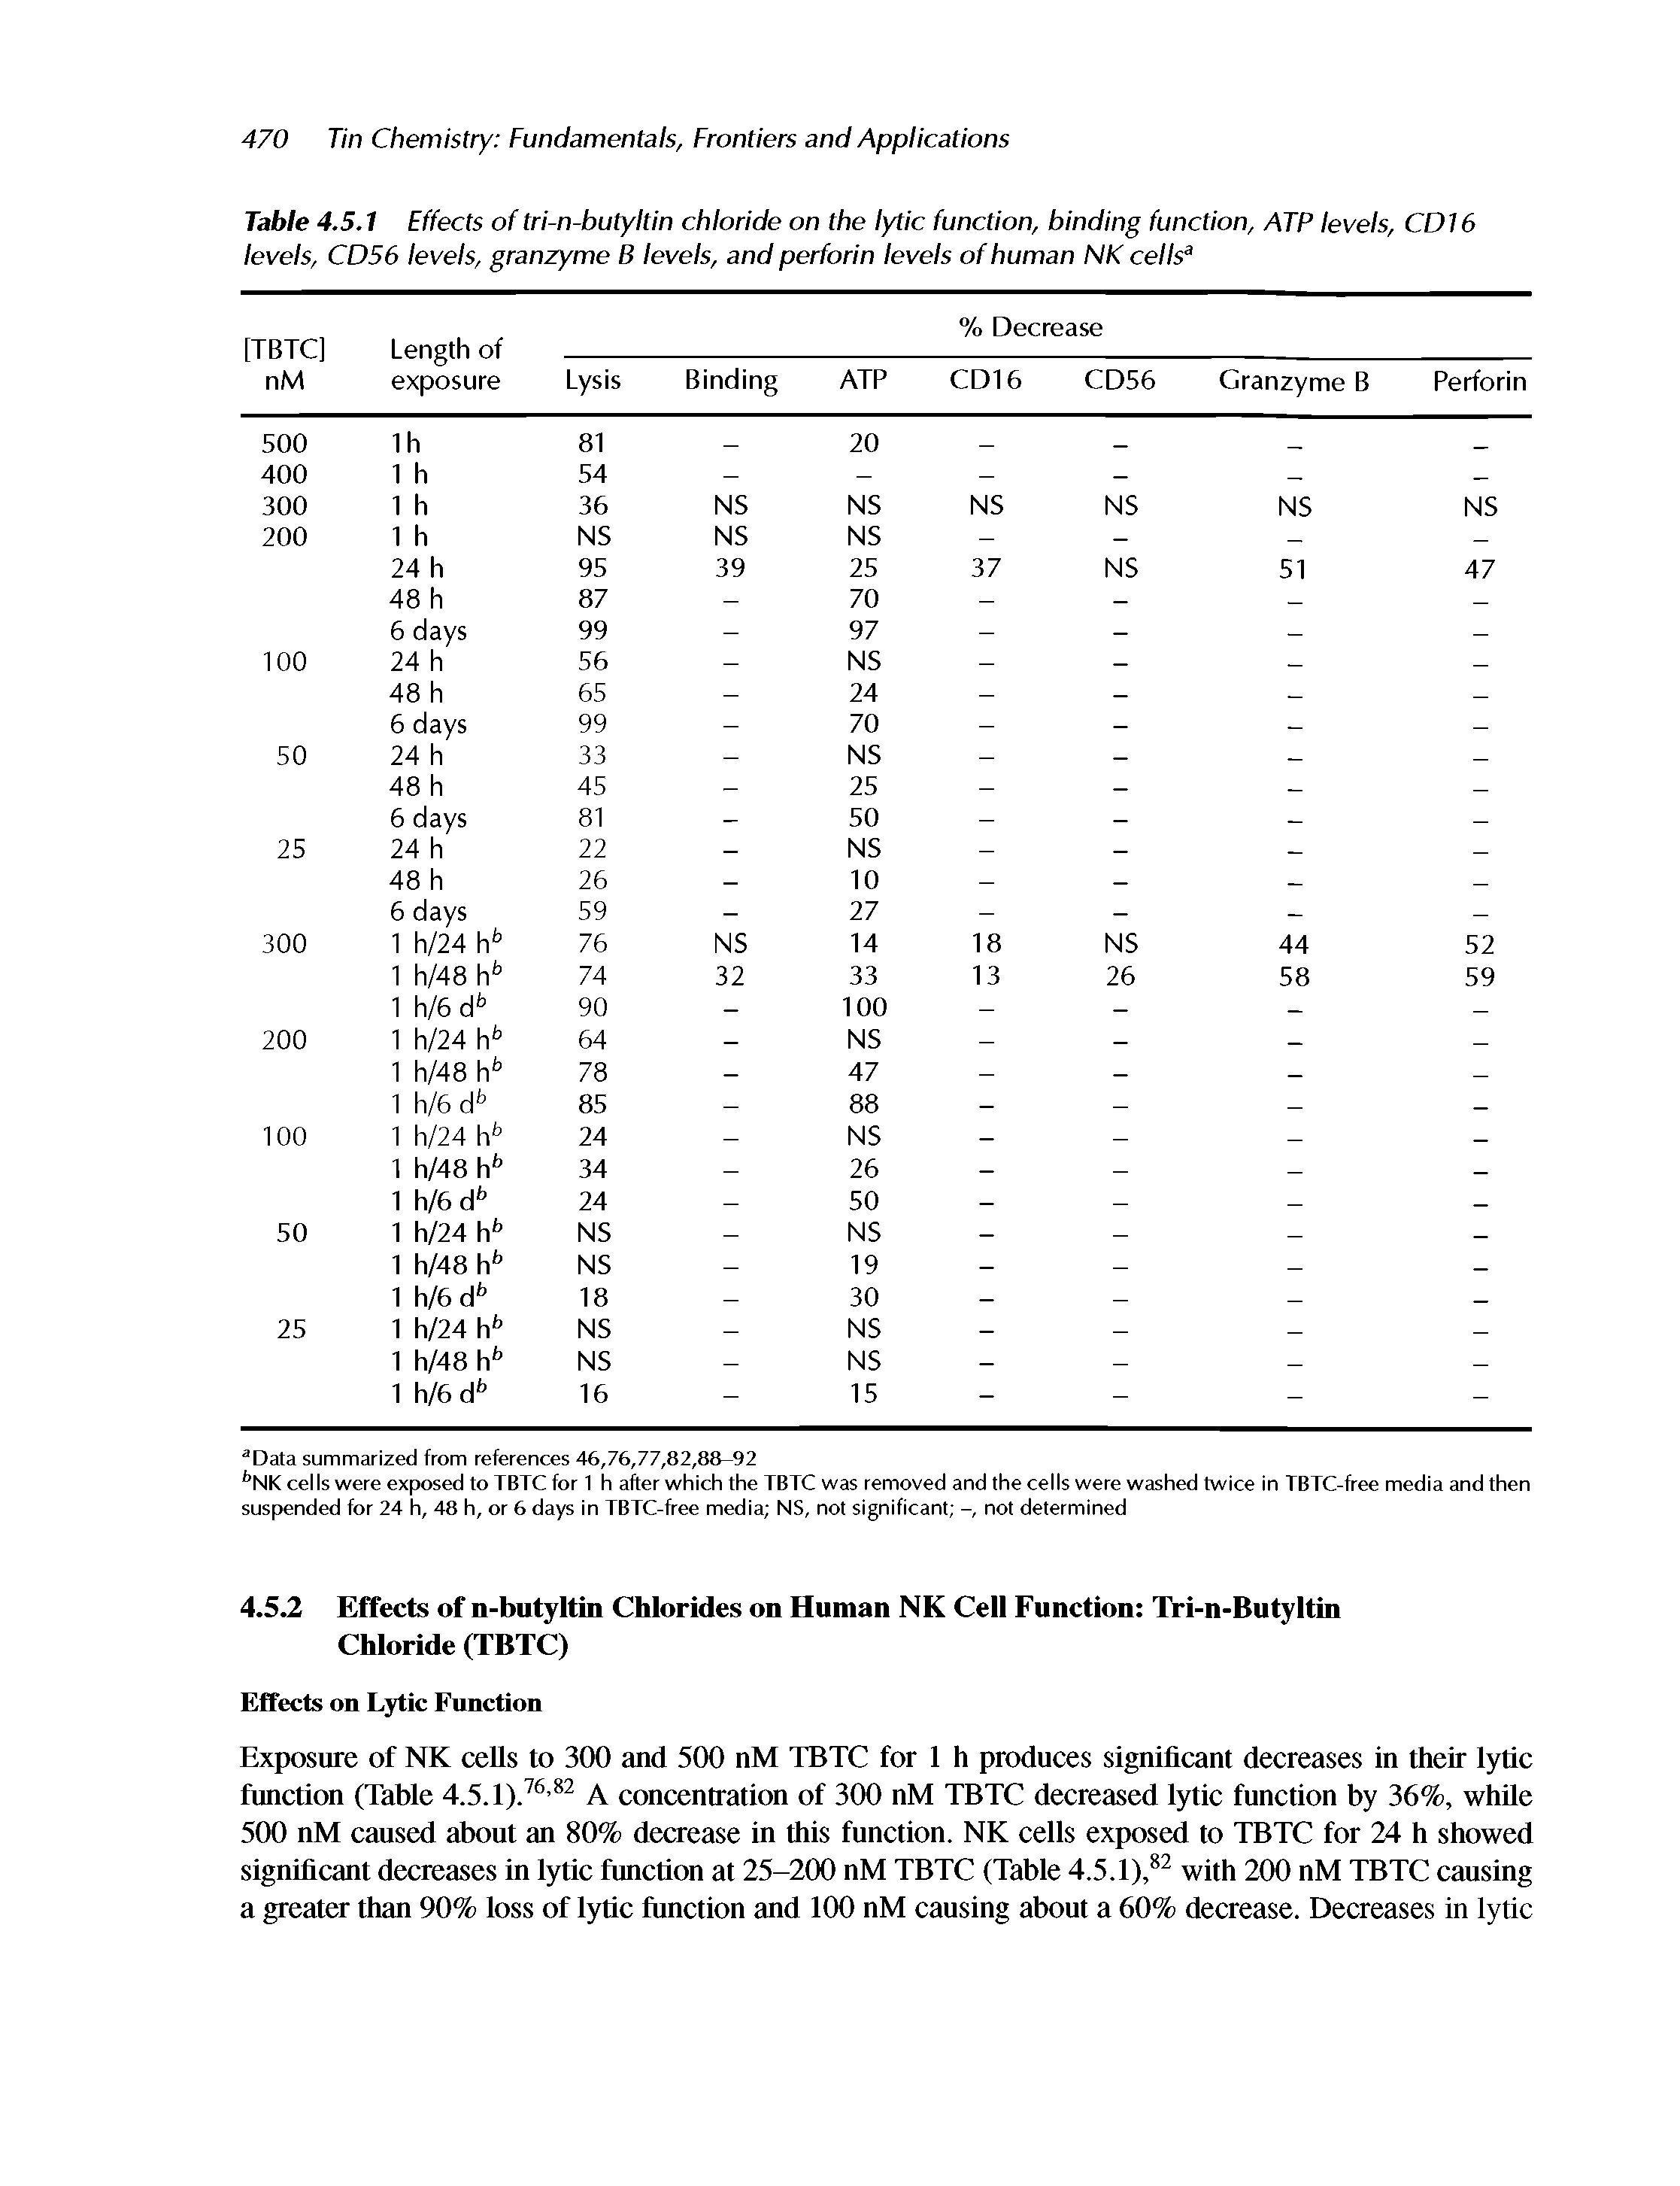 Table 4.5.1 Effects of tri-n-butyltin chloride on the lytic function, binding function, ATP levels, CD16 levels, CD56 levels, granzyme B levels, and perforin levels of human NK cells ...